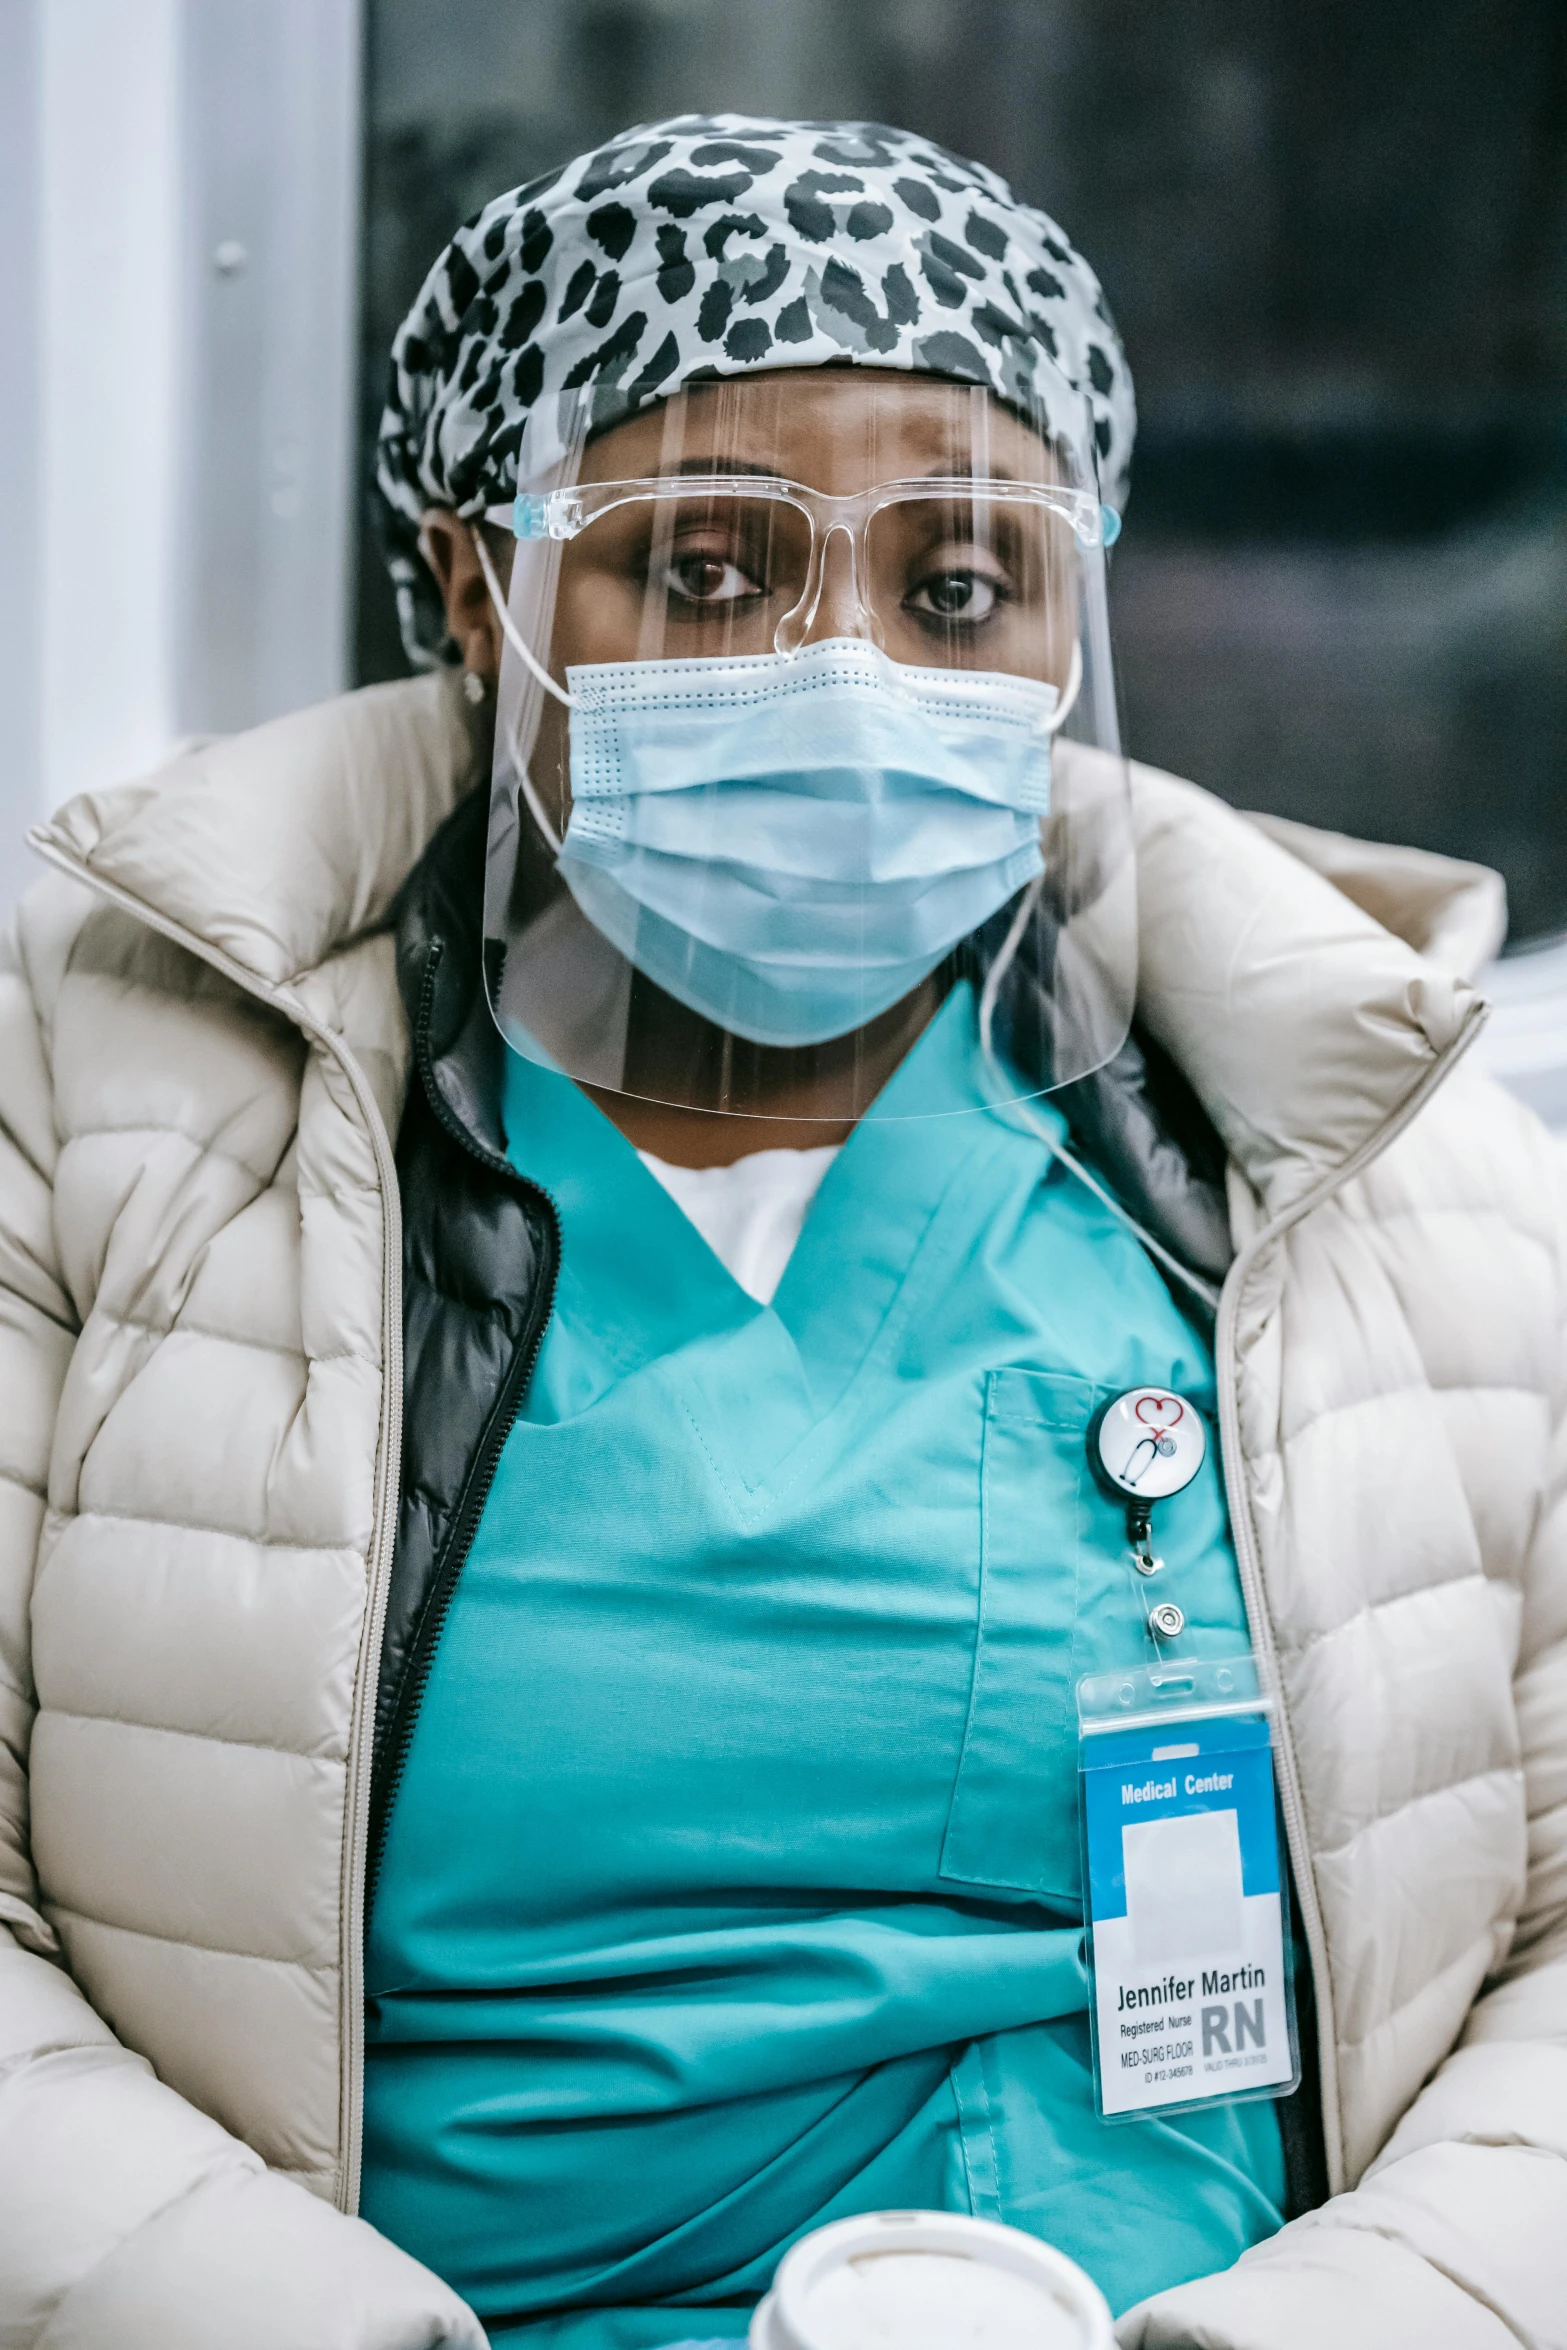 a woman wearing a face mask and holding a cup of coffee, surgical gown and scrubs on, african canadian, documentary photo, looking serious